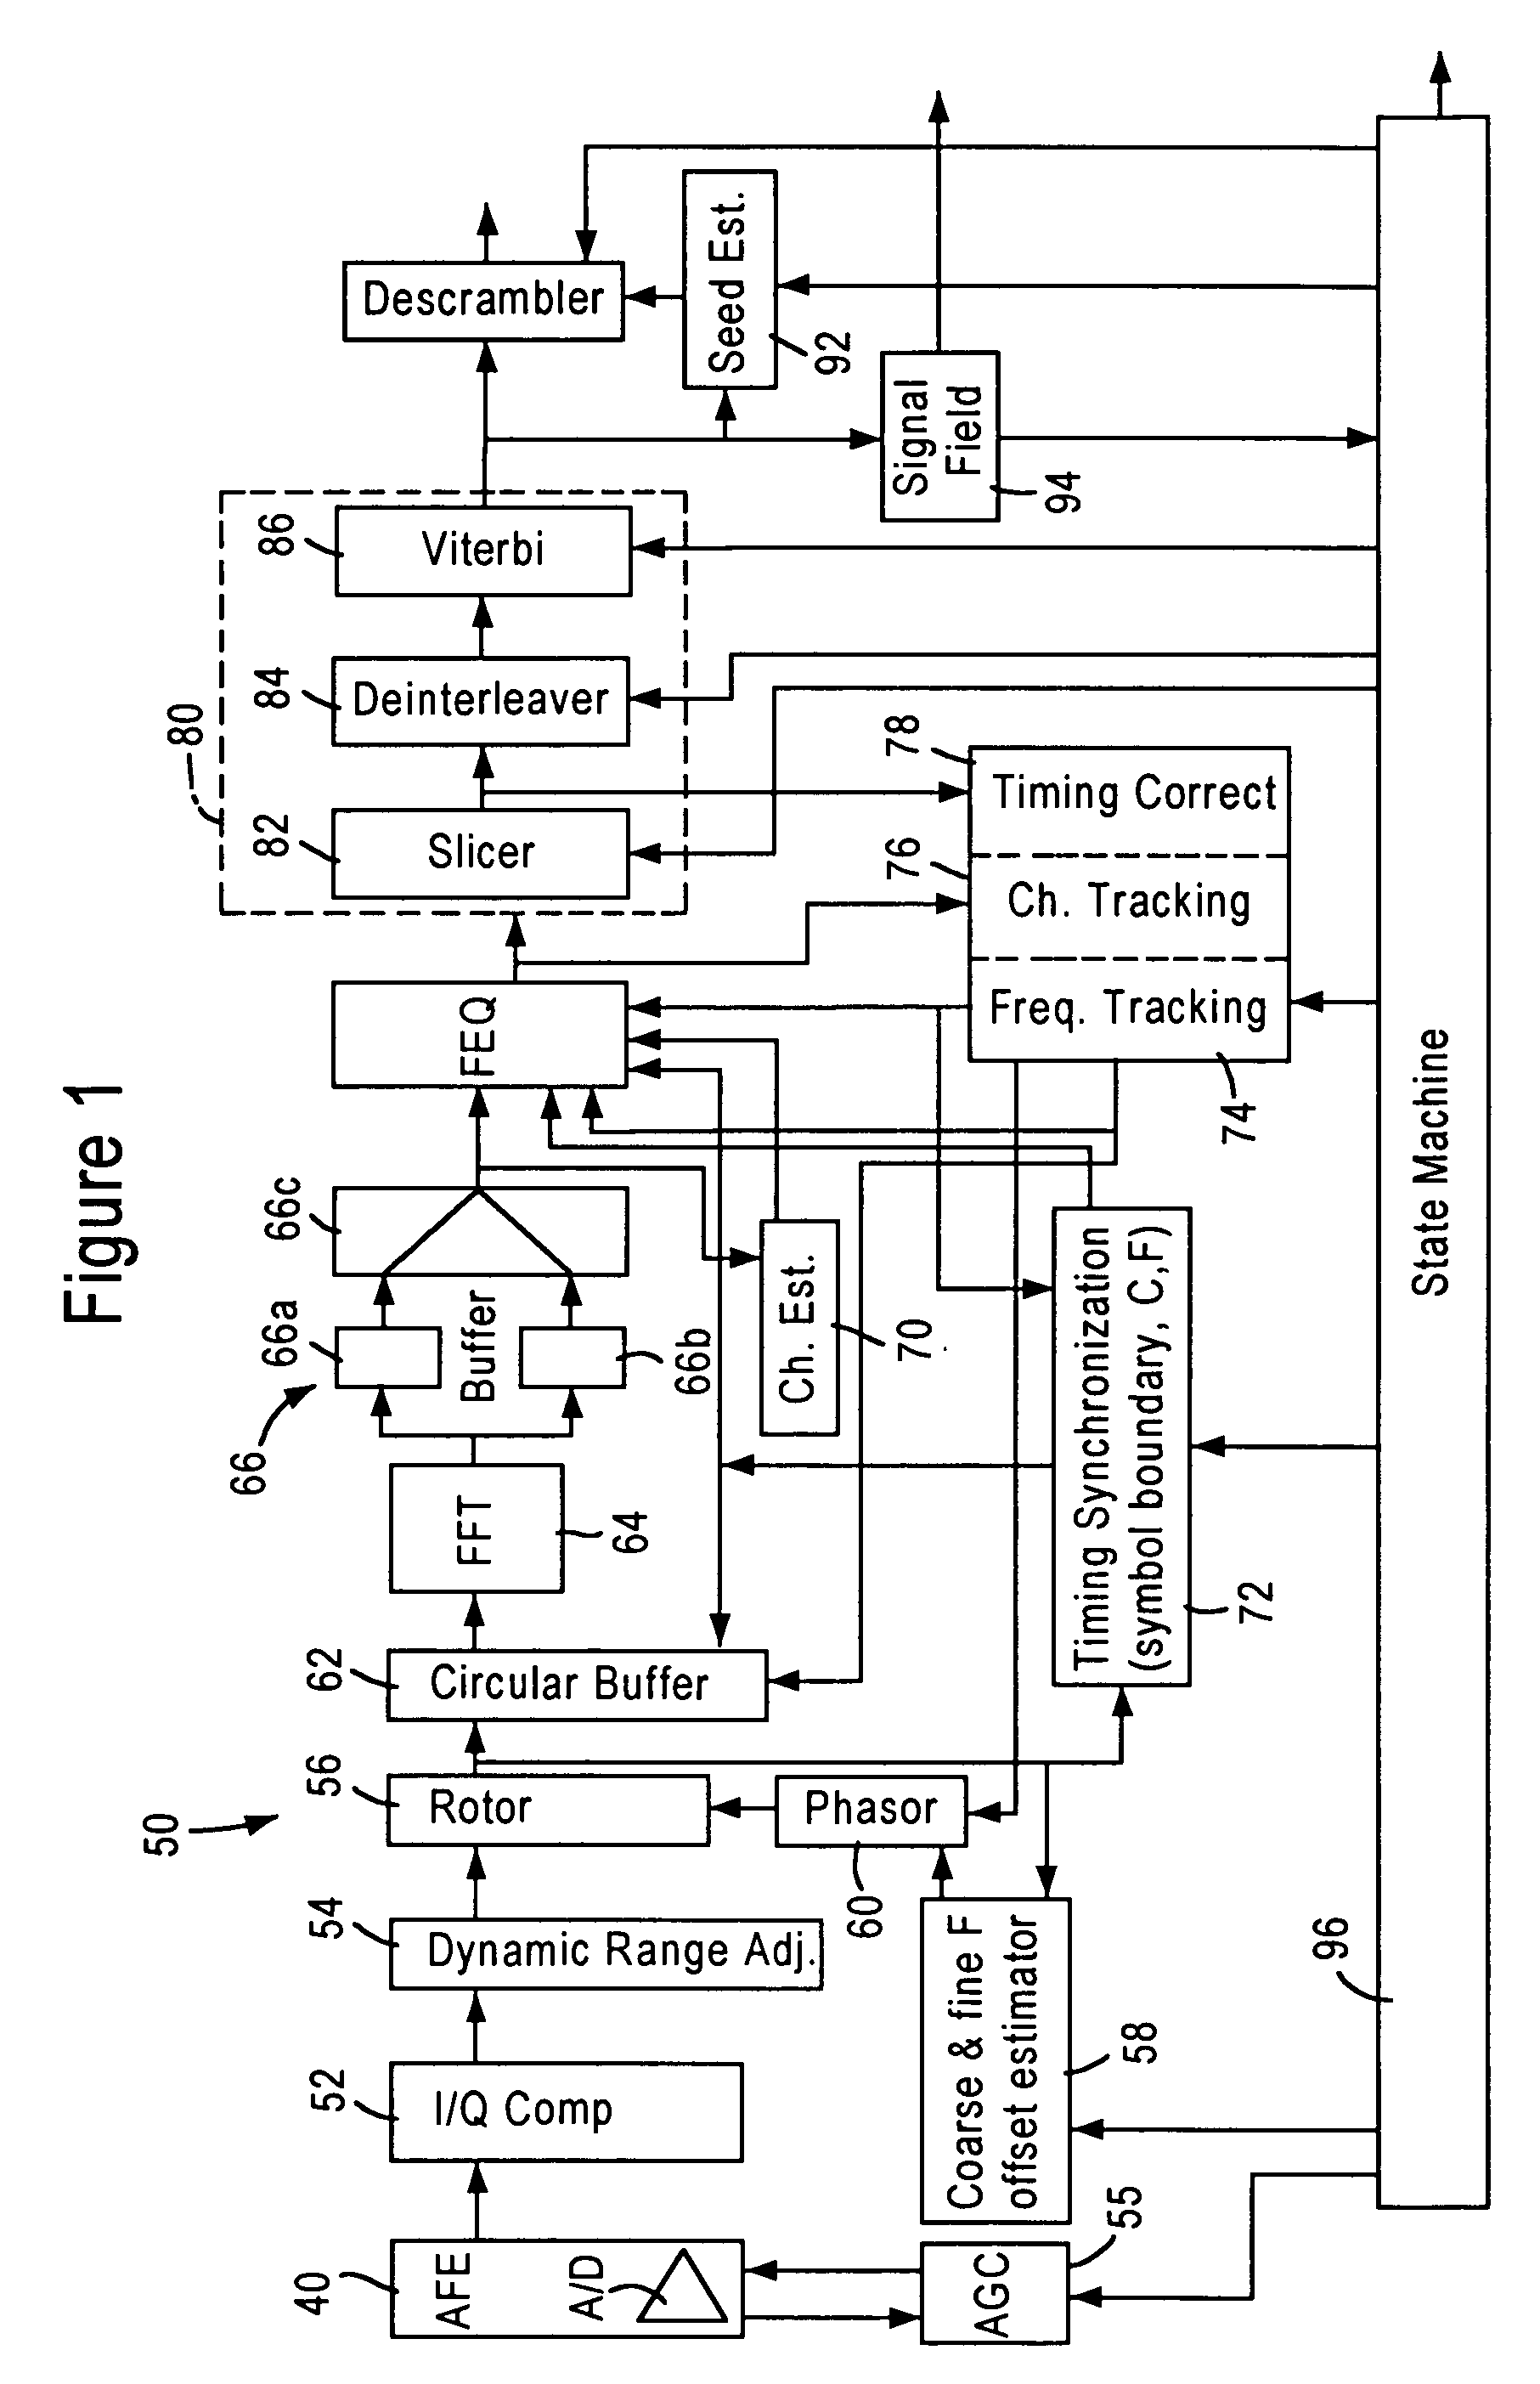 Optimal initial gain selection for wireless receiver